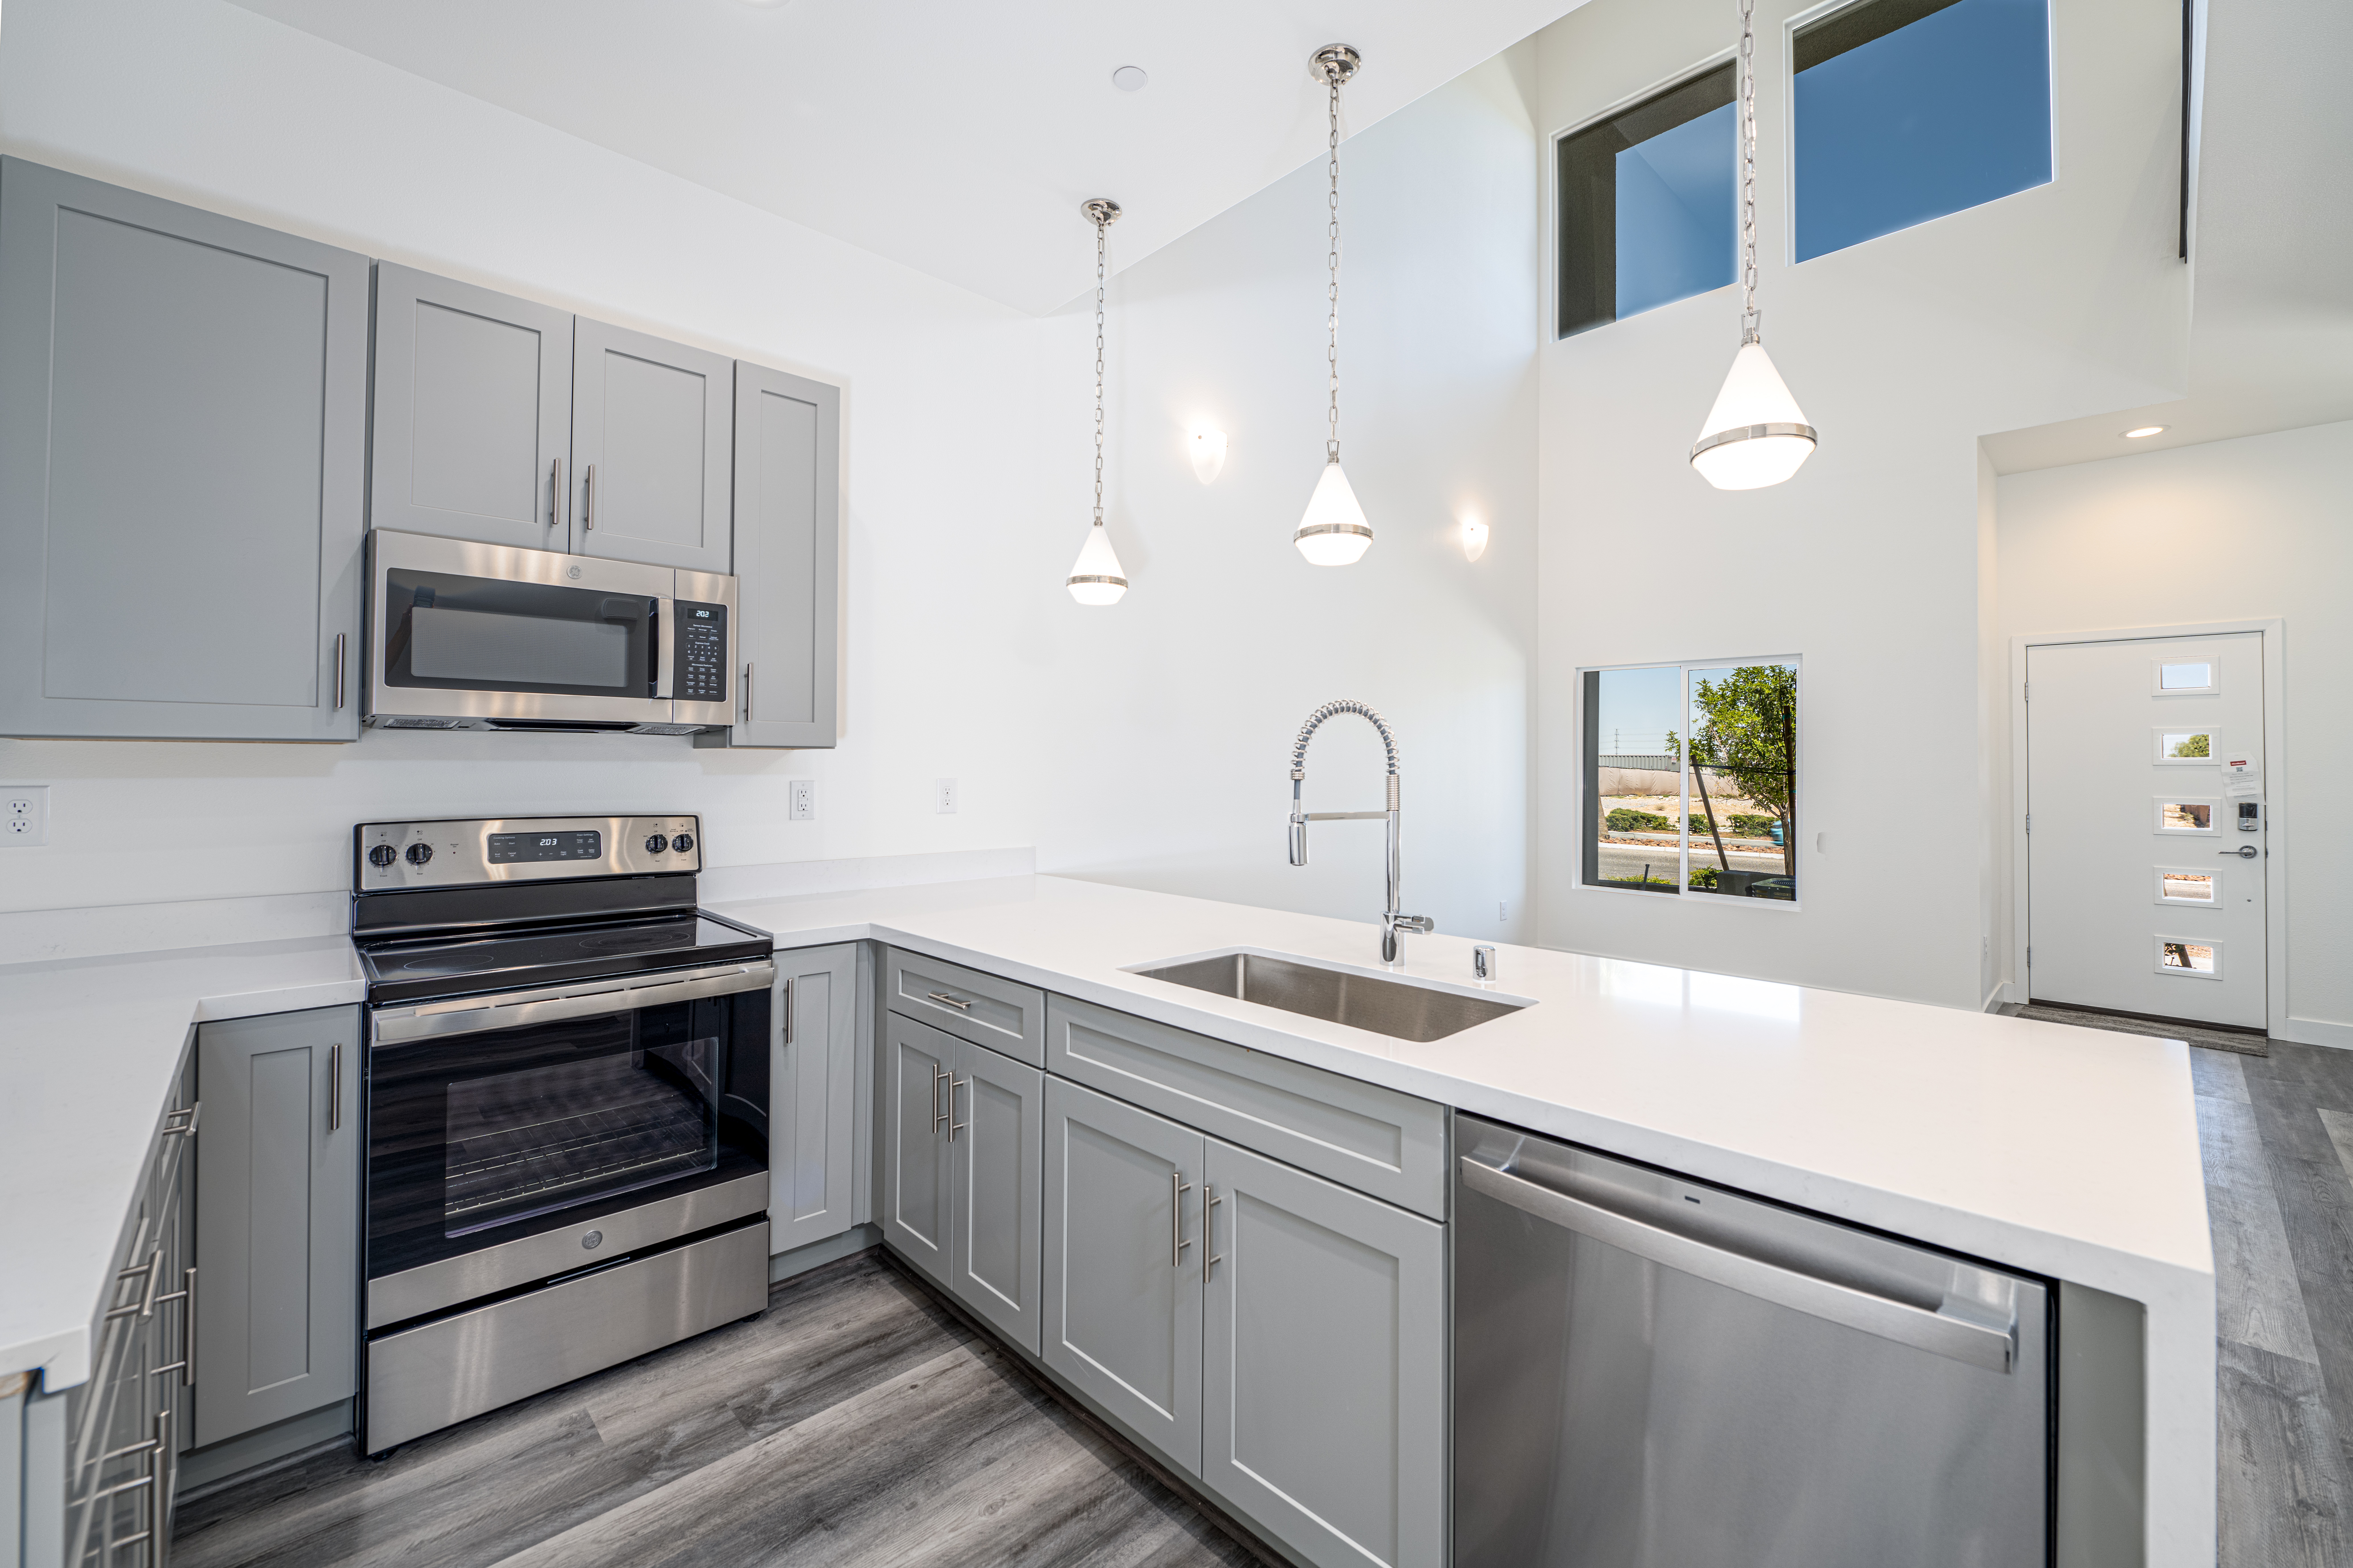 Kitchen of Unit A at Thrive by Edward Homes